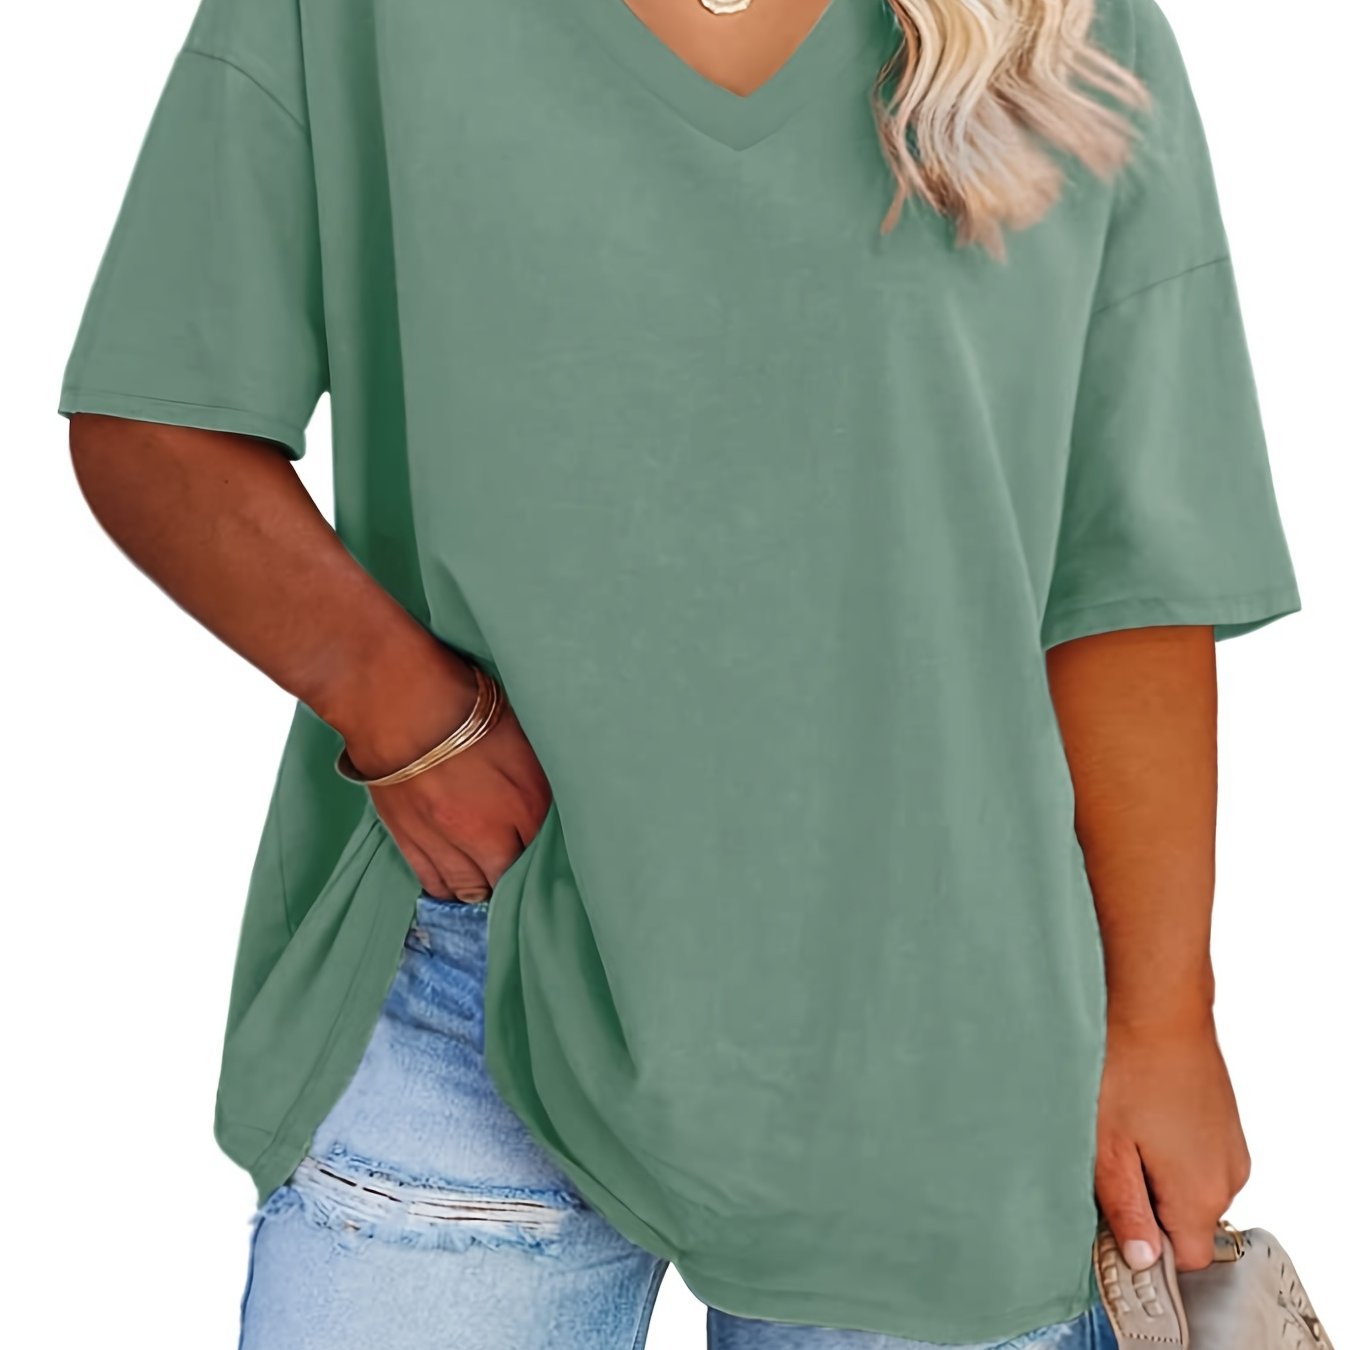 CTEEGC Womens T Shirts Clearance Plus Size O-Neck Tee Casual